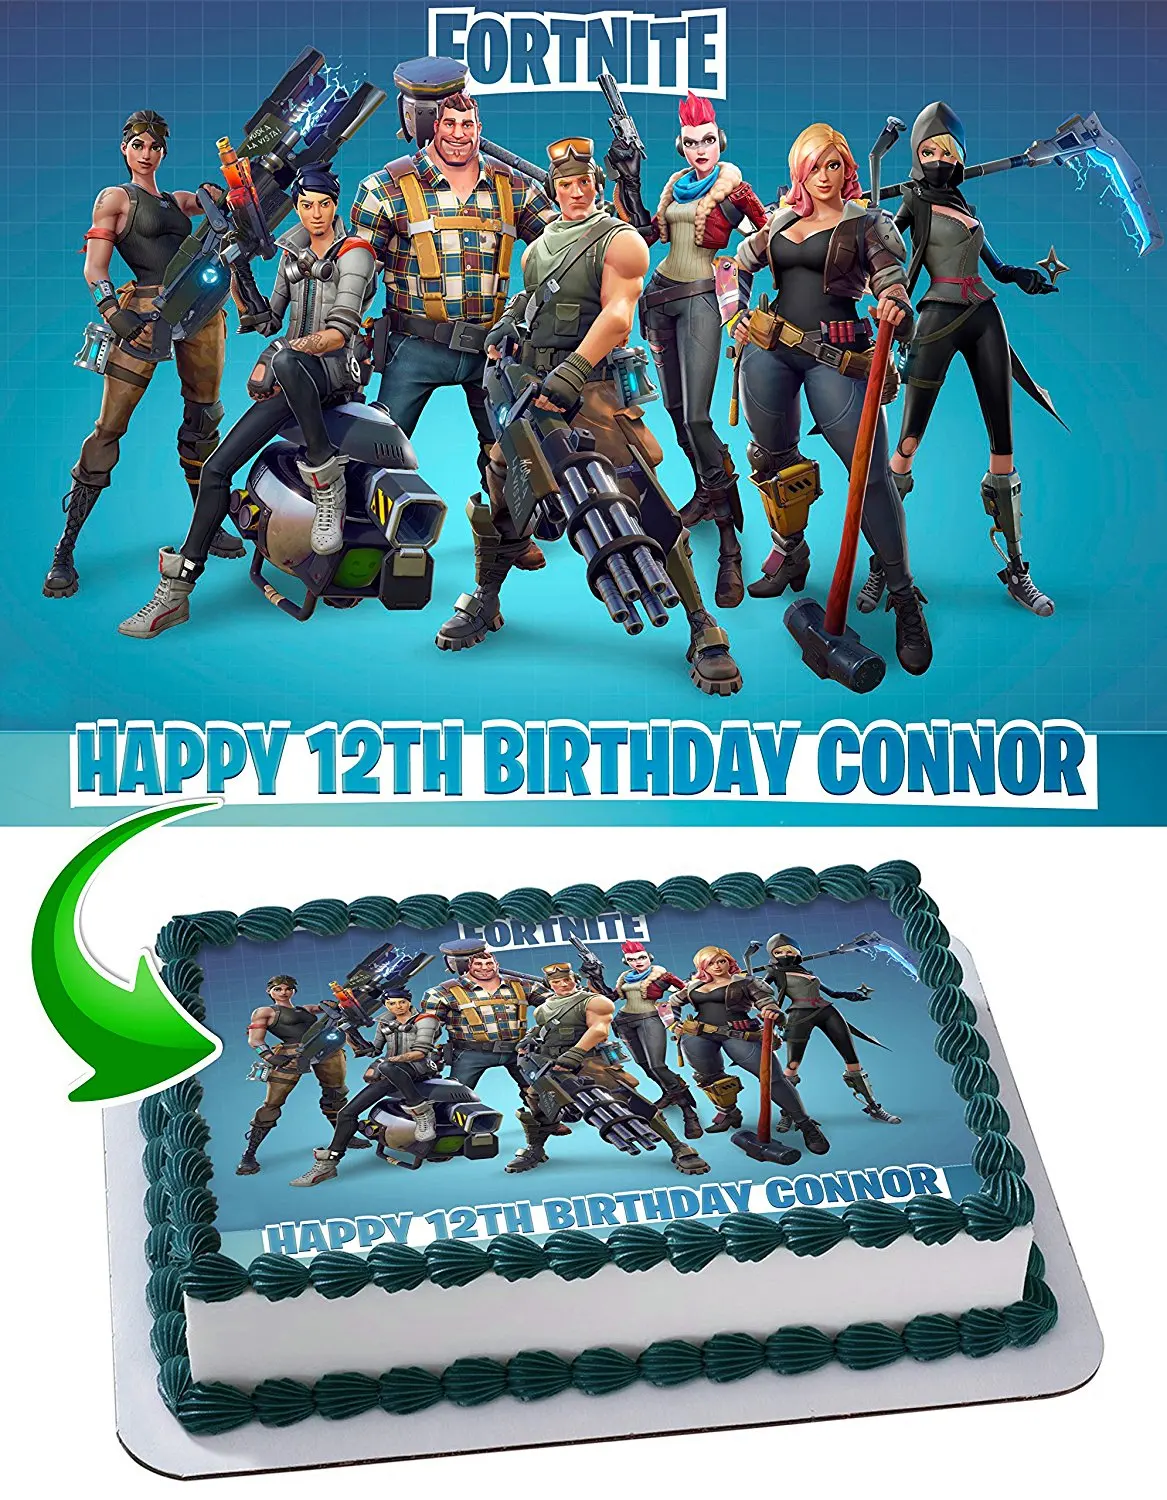 Buy Fortnite Edible Image Cake Topper Personalized Icing Sugar Paper - 